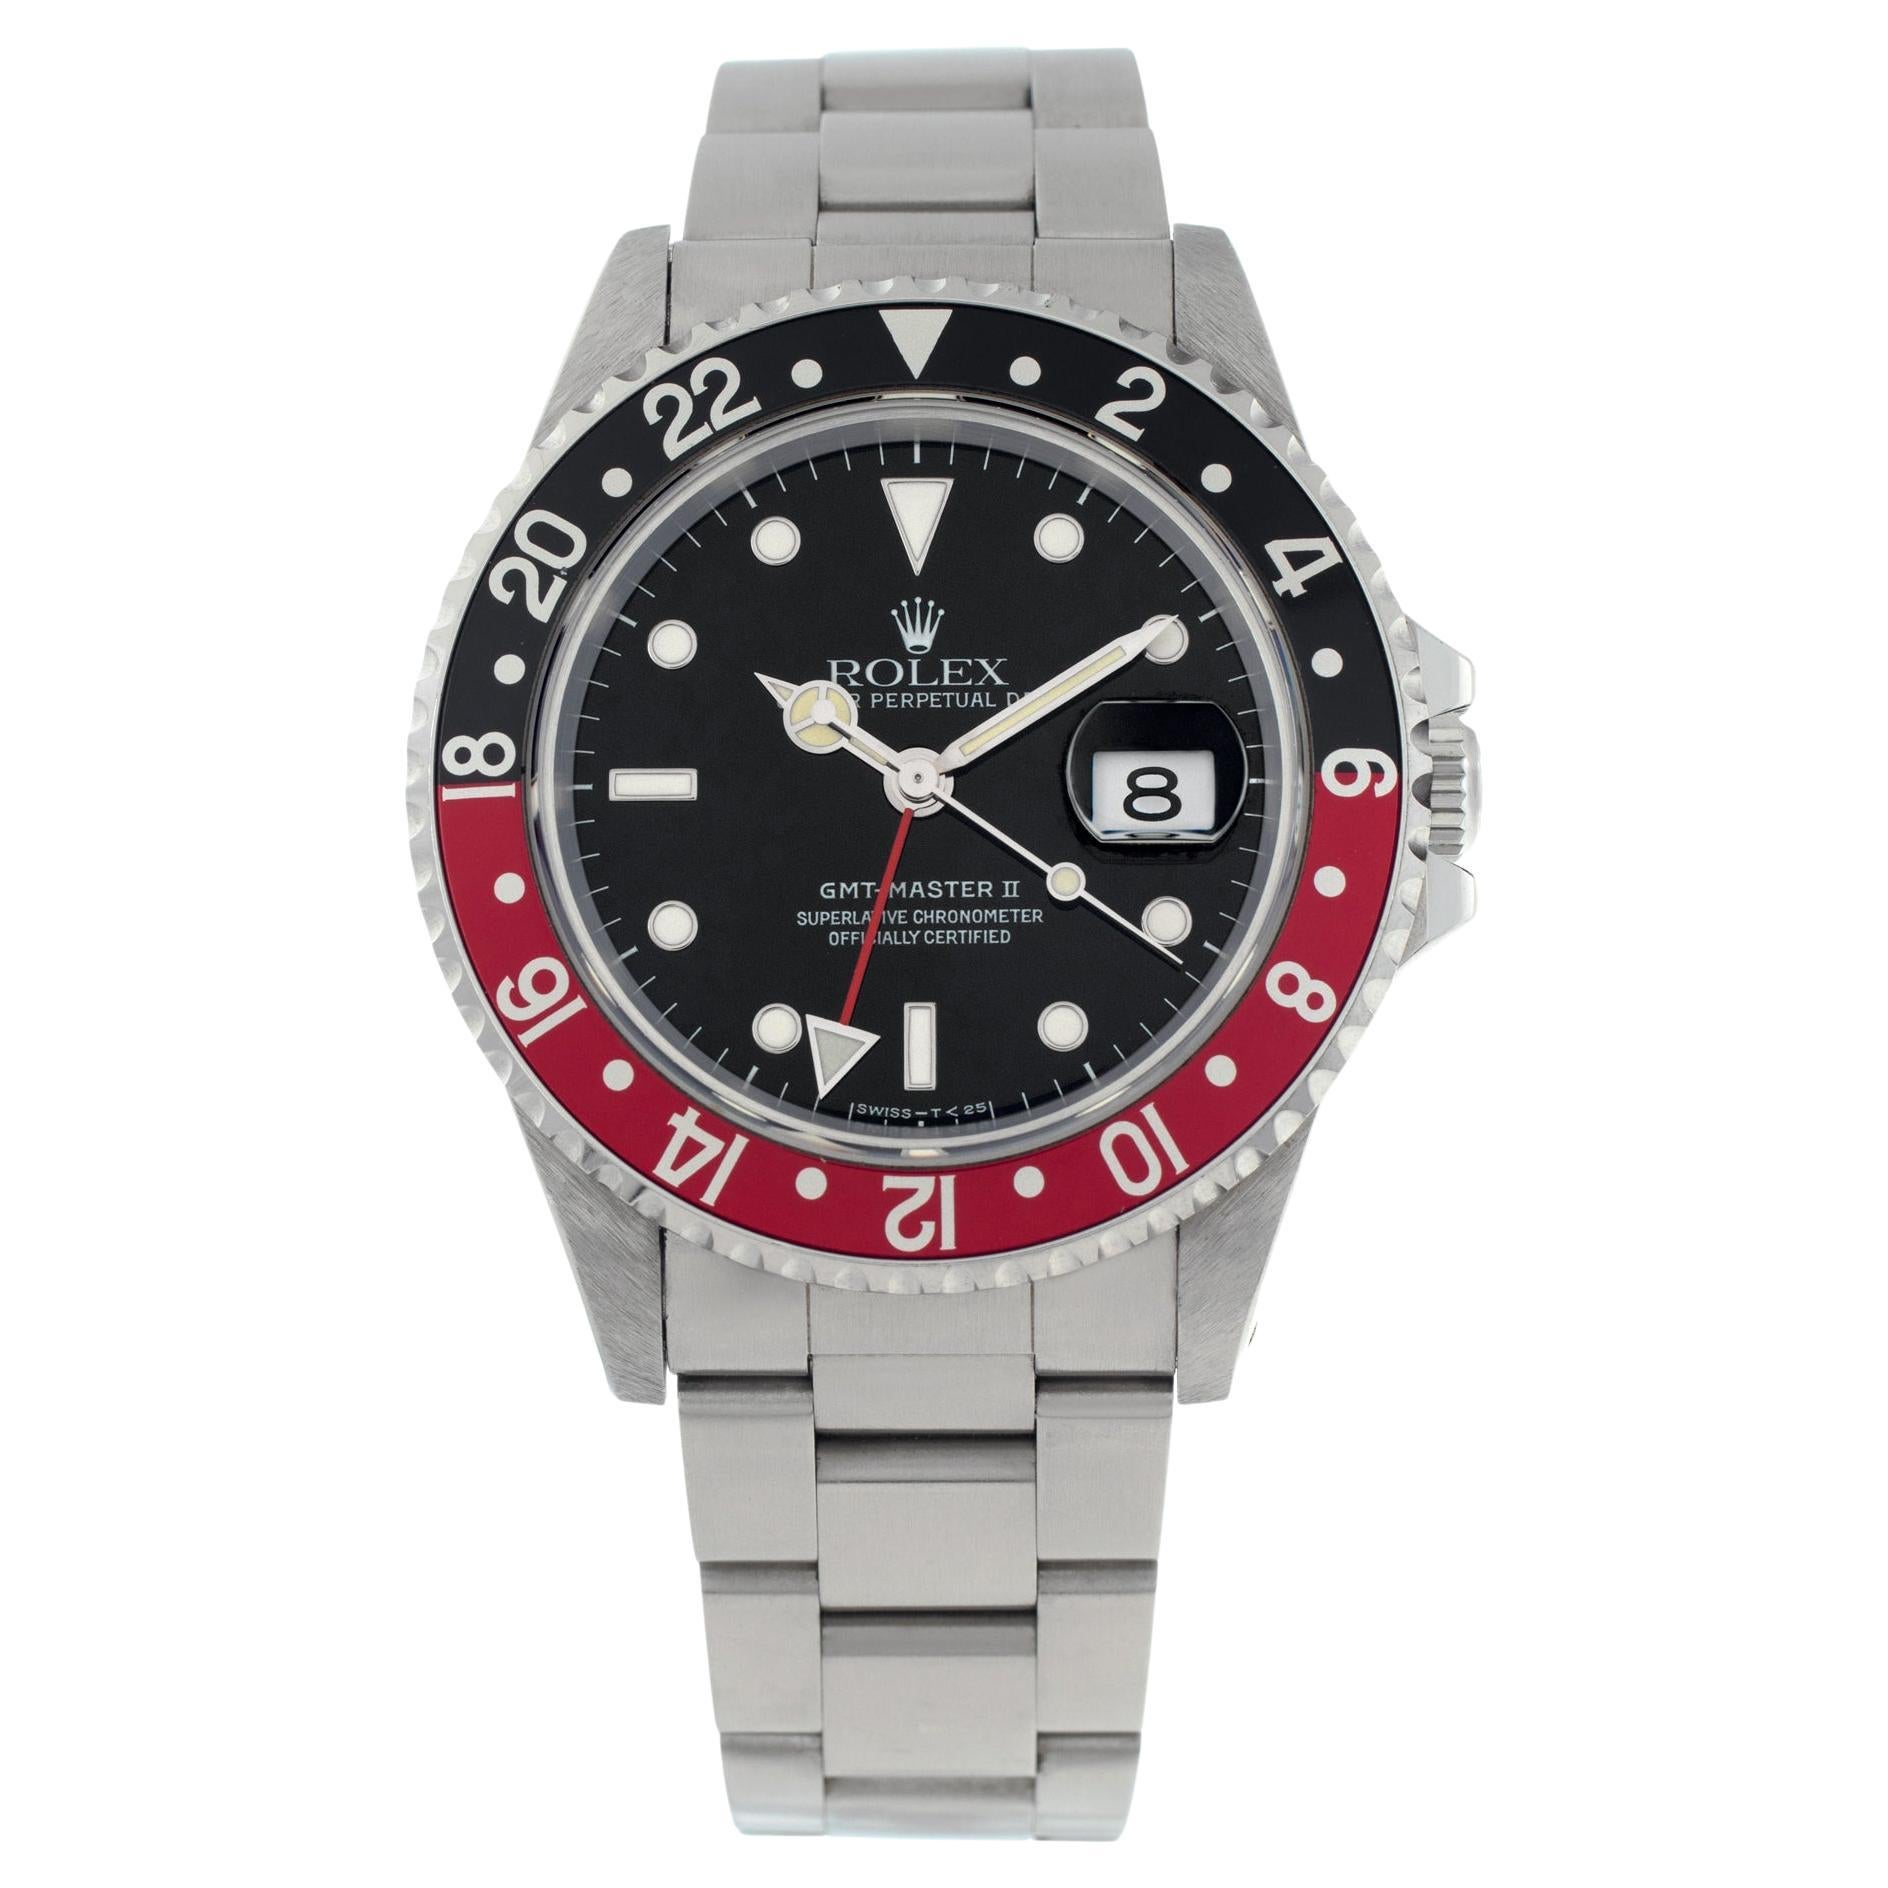 Rolex Gmt-Master "Coke" Stainless Steel Wristwatch Ref 16710 For Sale